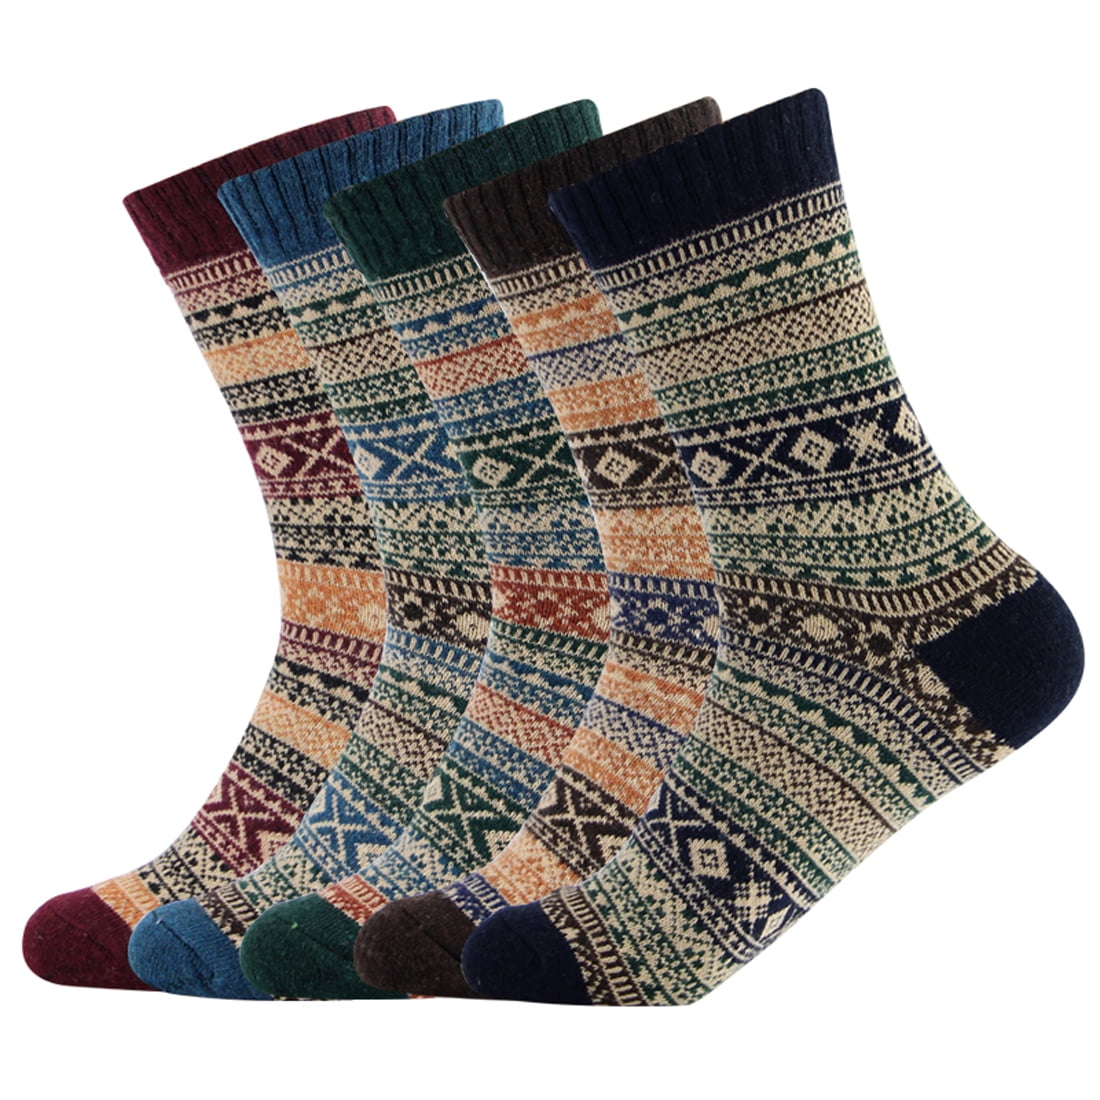 5pairs of thick winter socks for women warm and comfortable wool Christmas socks 